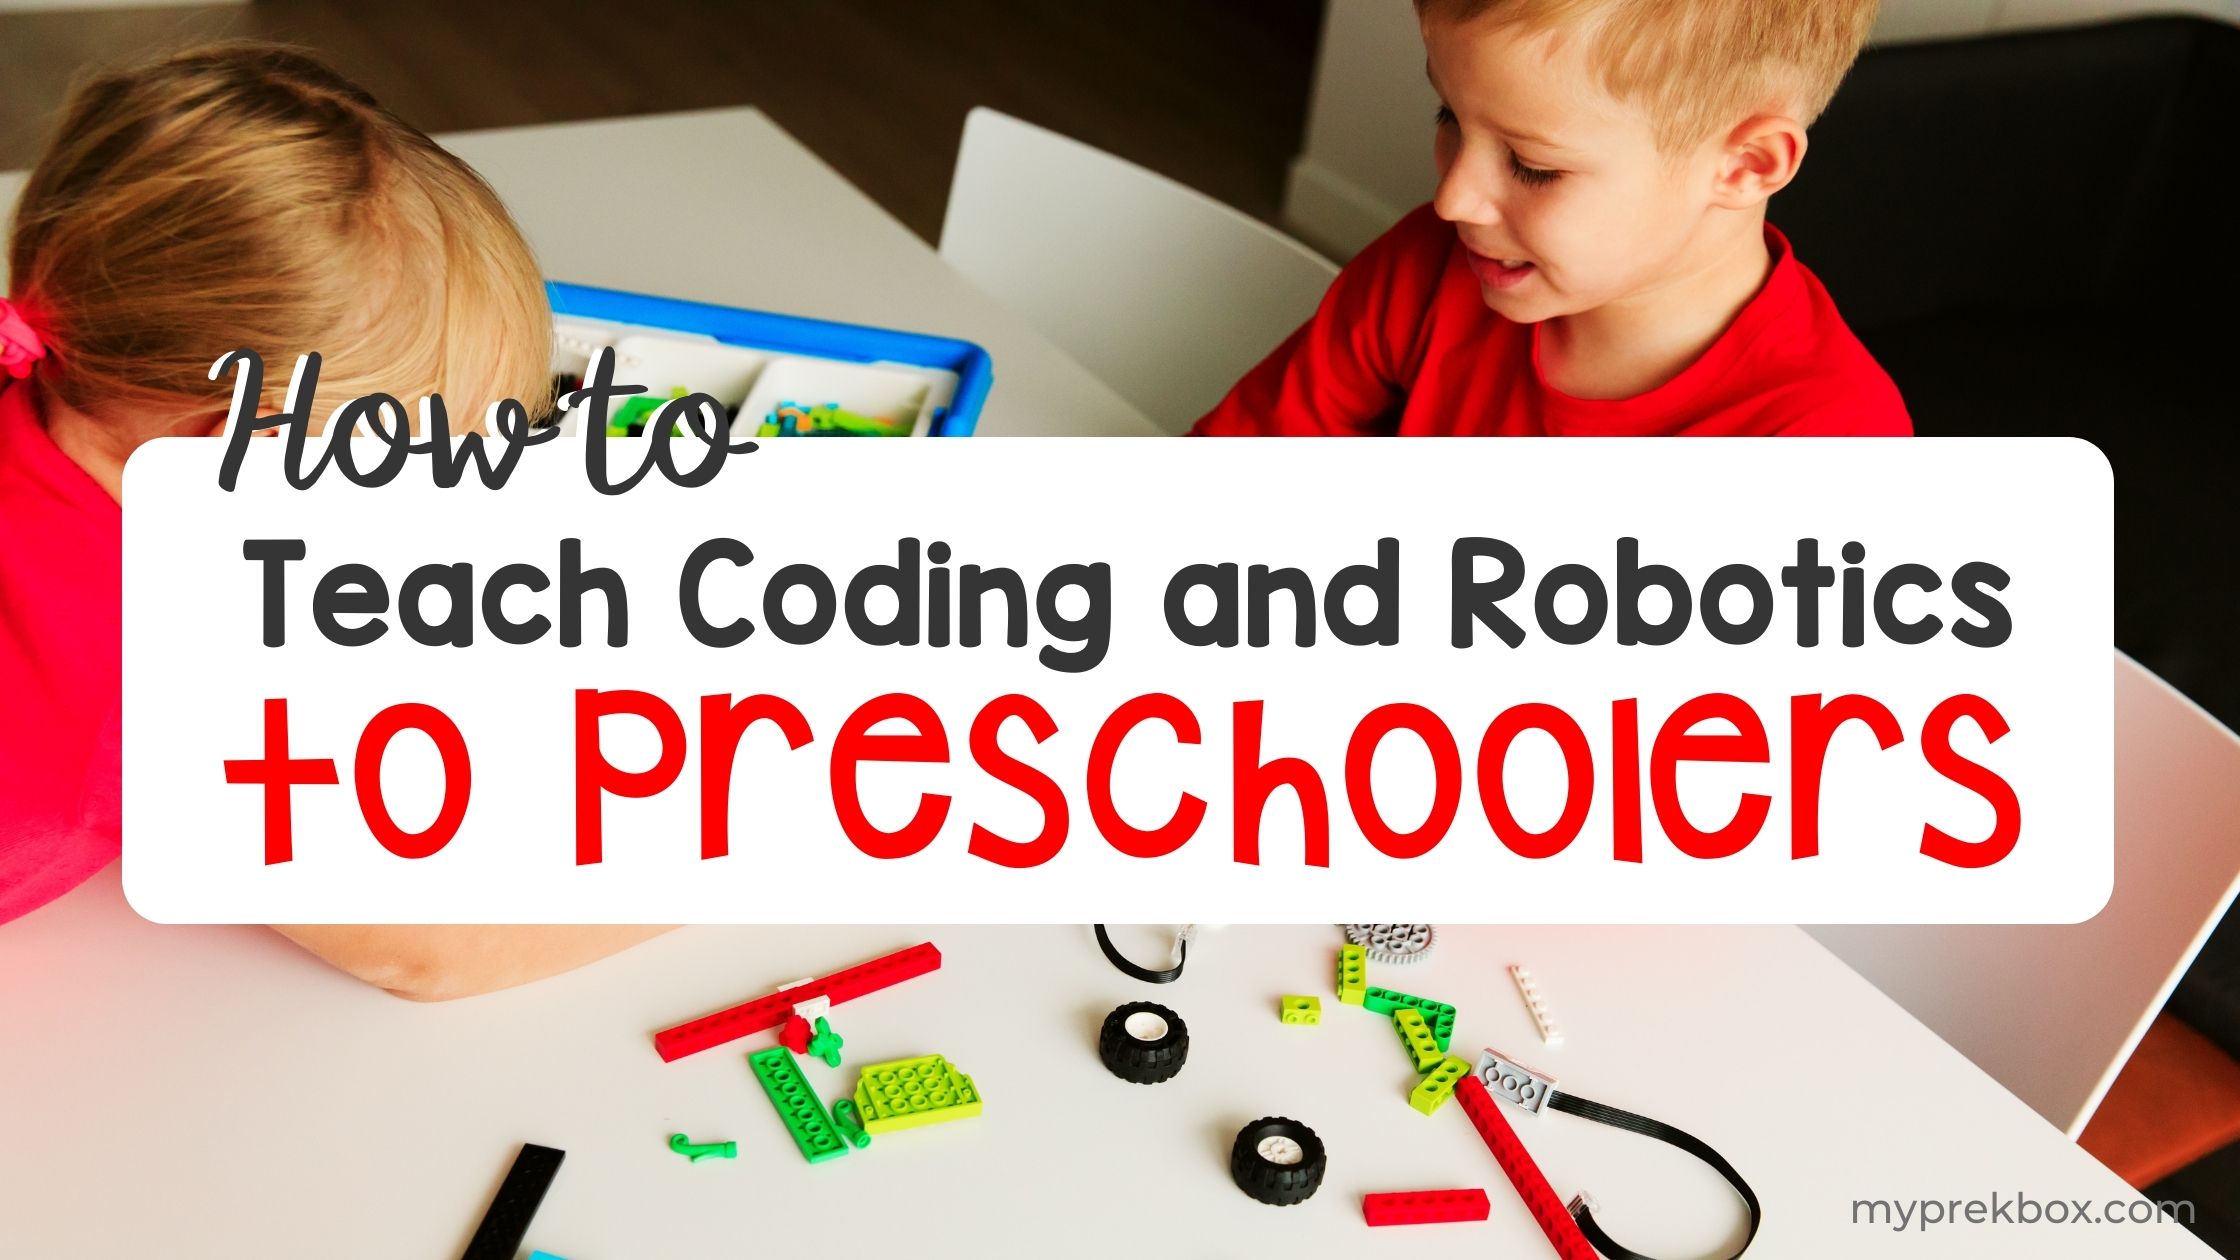 How to Teach Coding and Robotics to Preschoolers